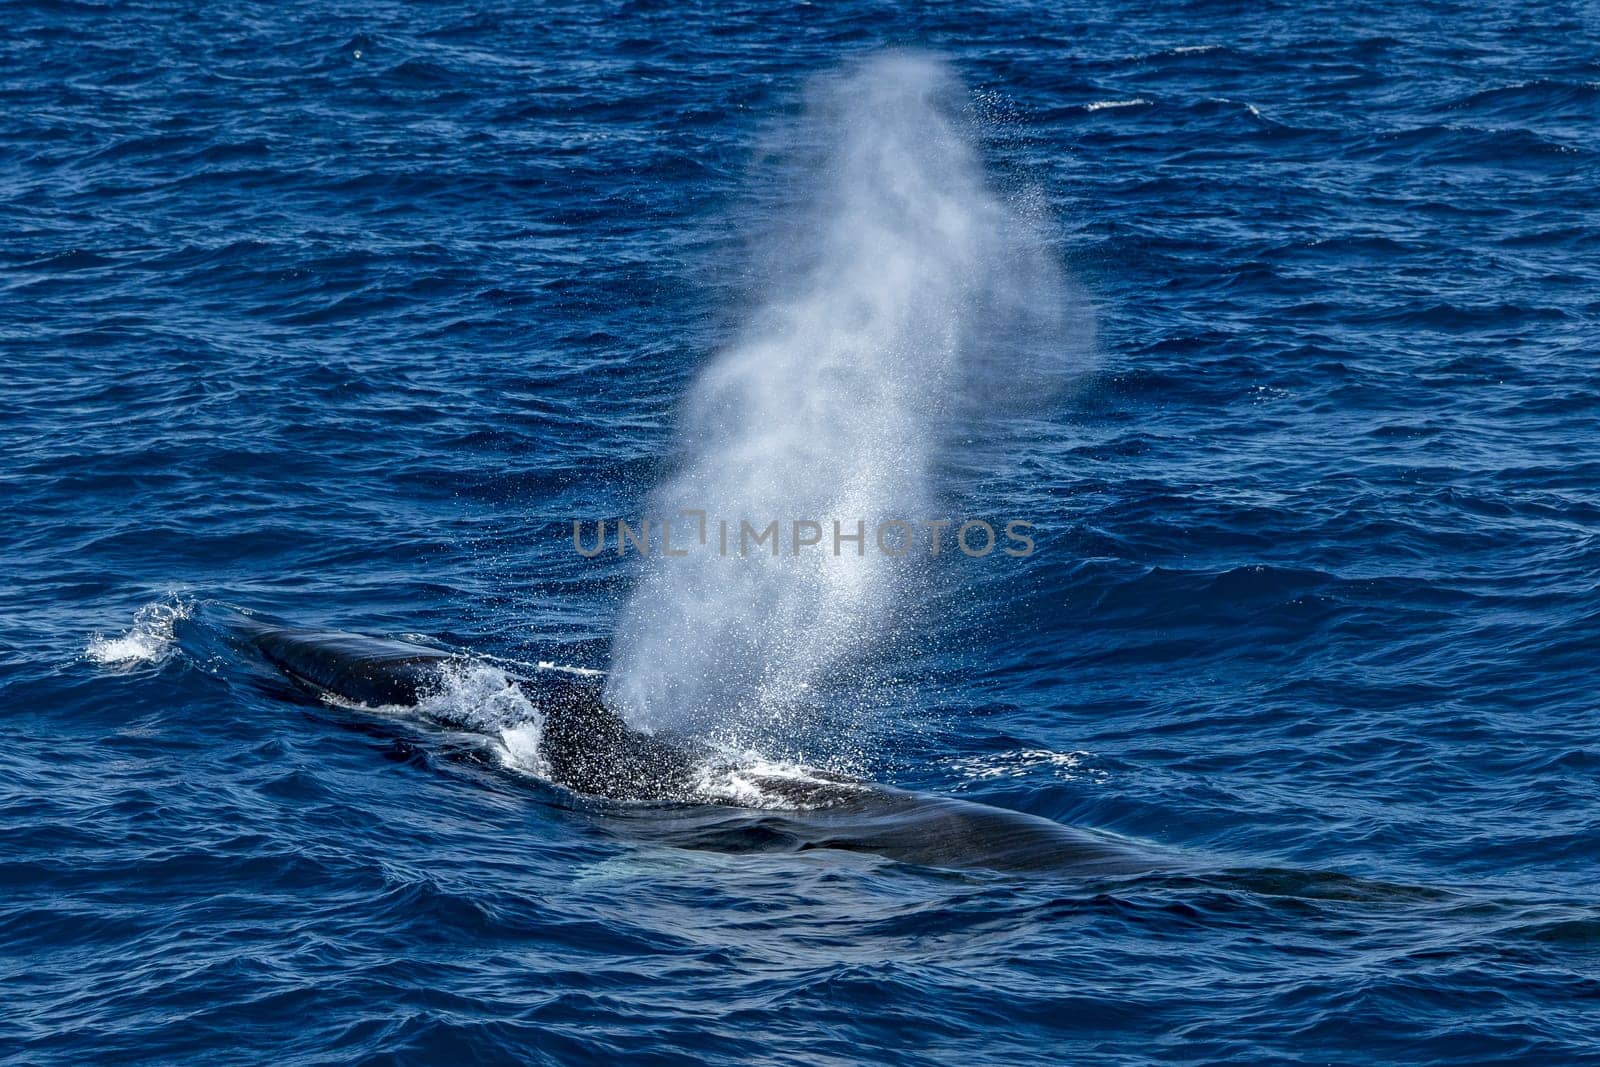 A Fin Whale Balaenoptera physalus while blowing endangered rare to see in Mediterranean sea